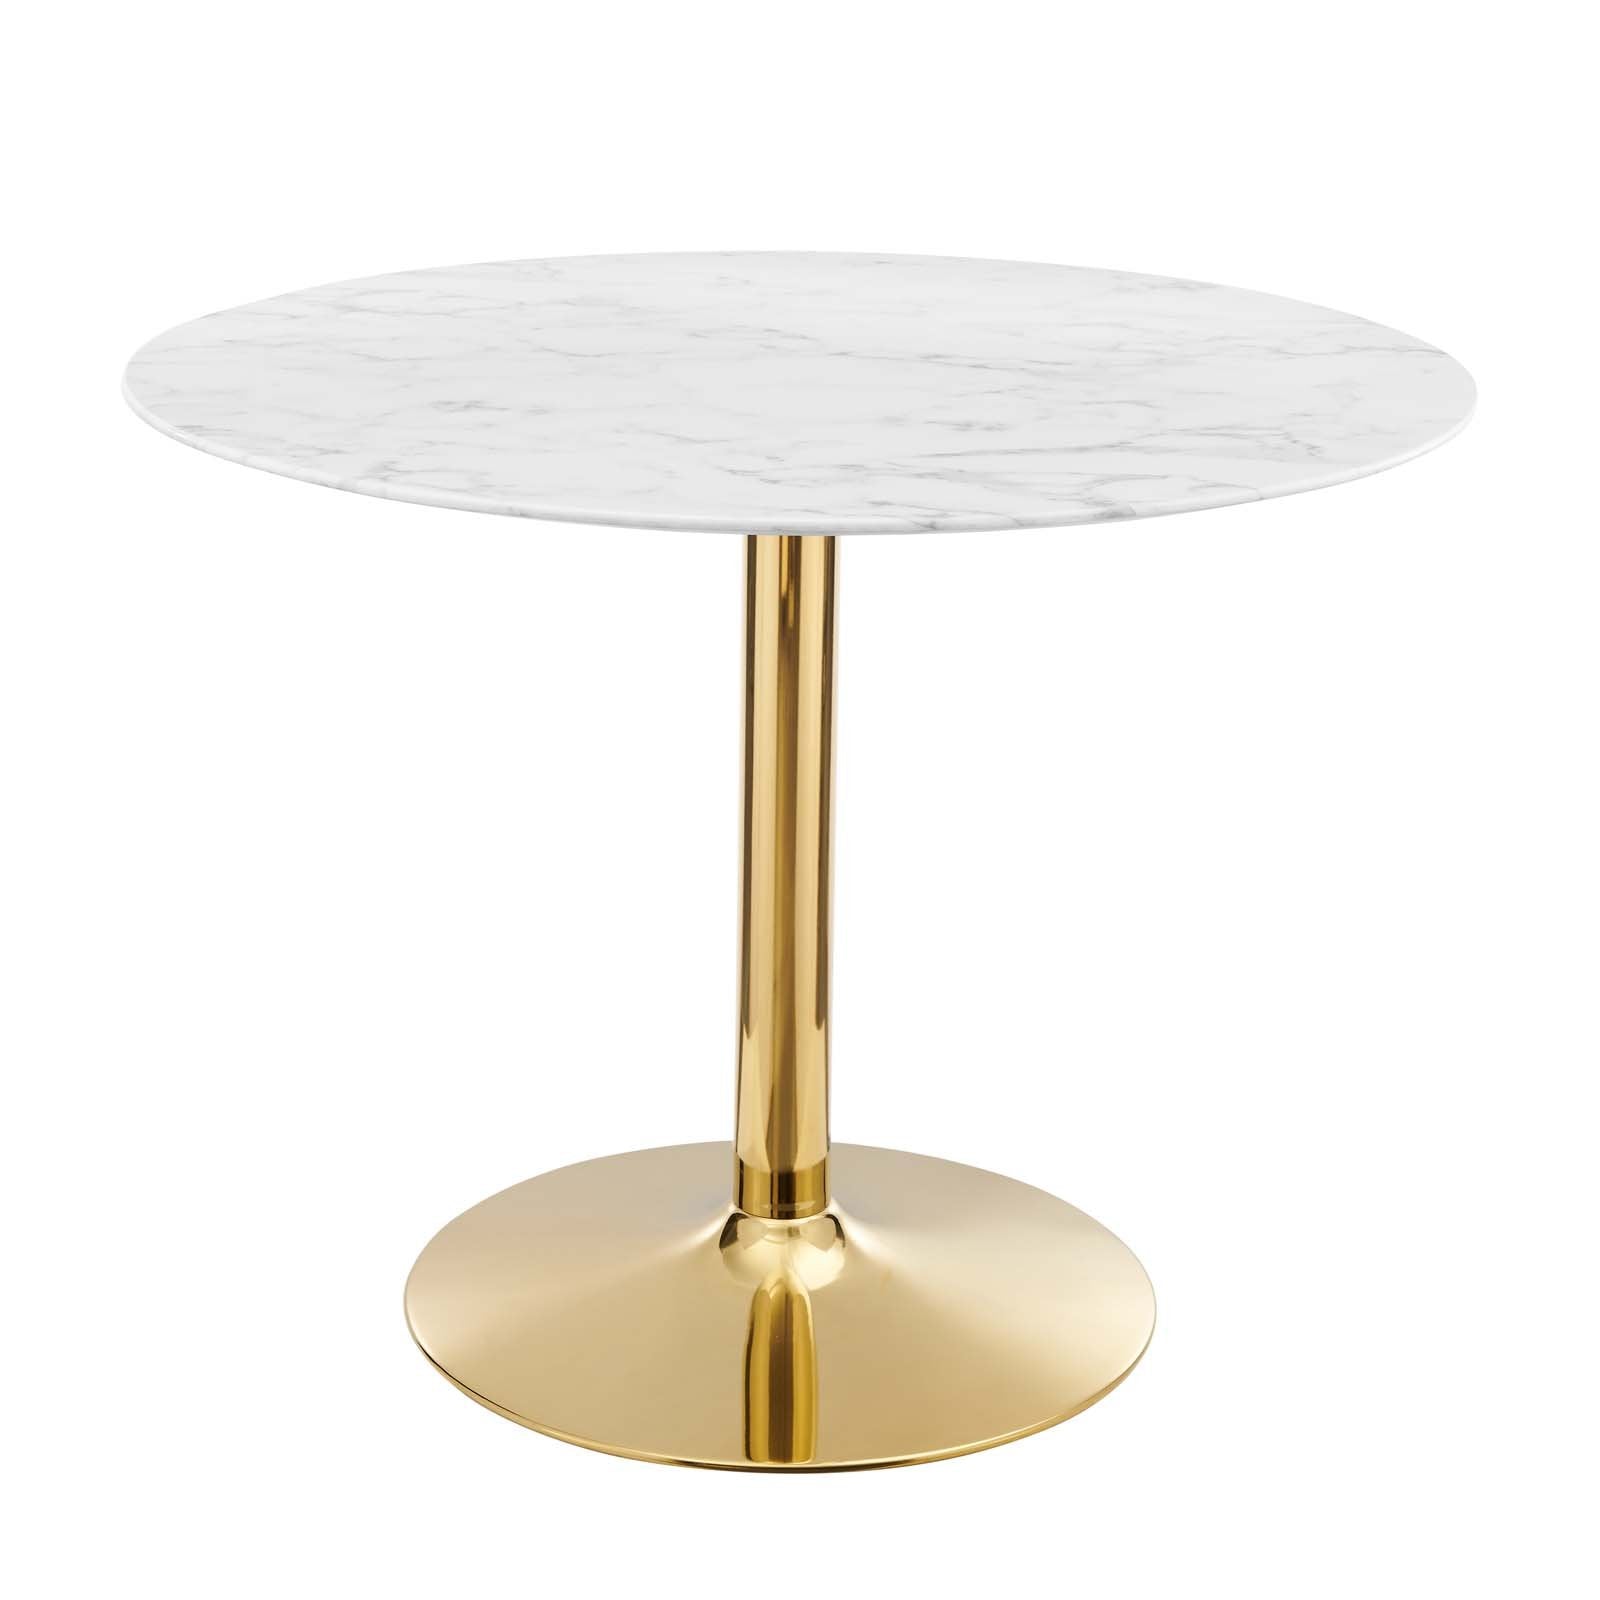 Verne 40" Artificial Marble Dining Table